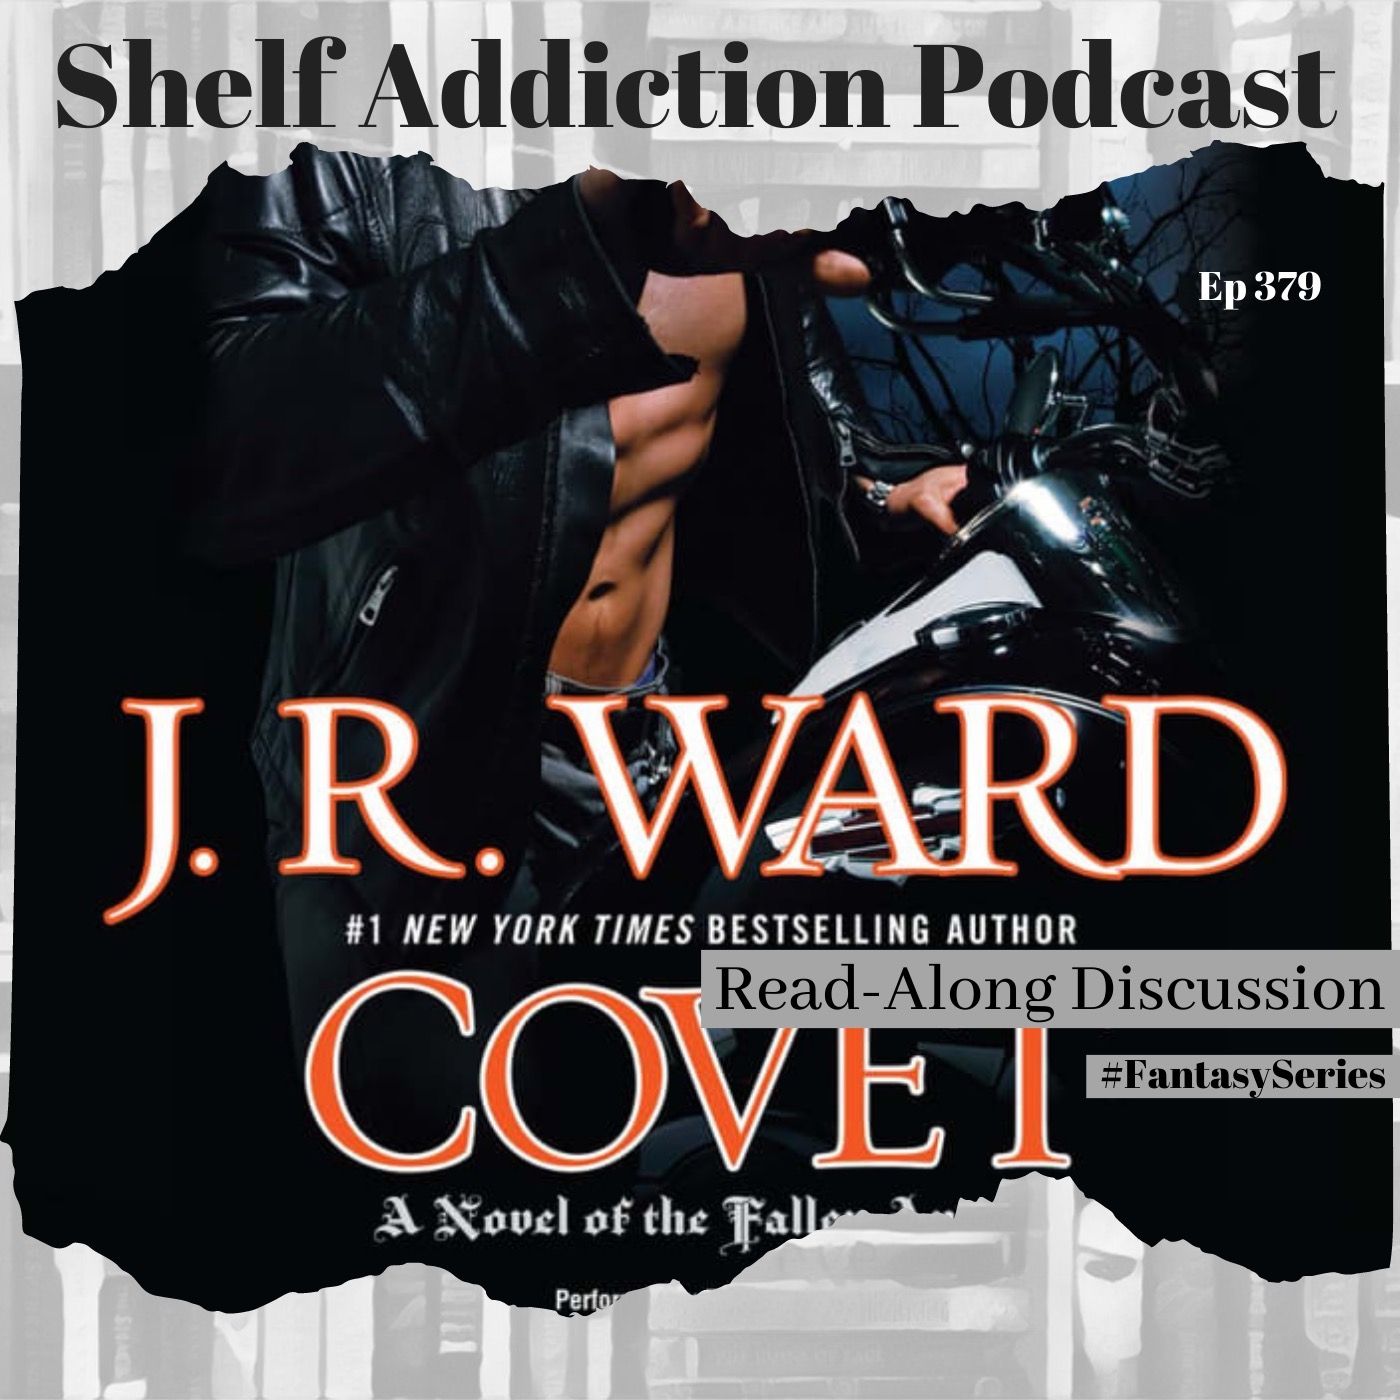 #FantasySeries Discussion of Covet (Fallen Angels #1) | Book Chat